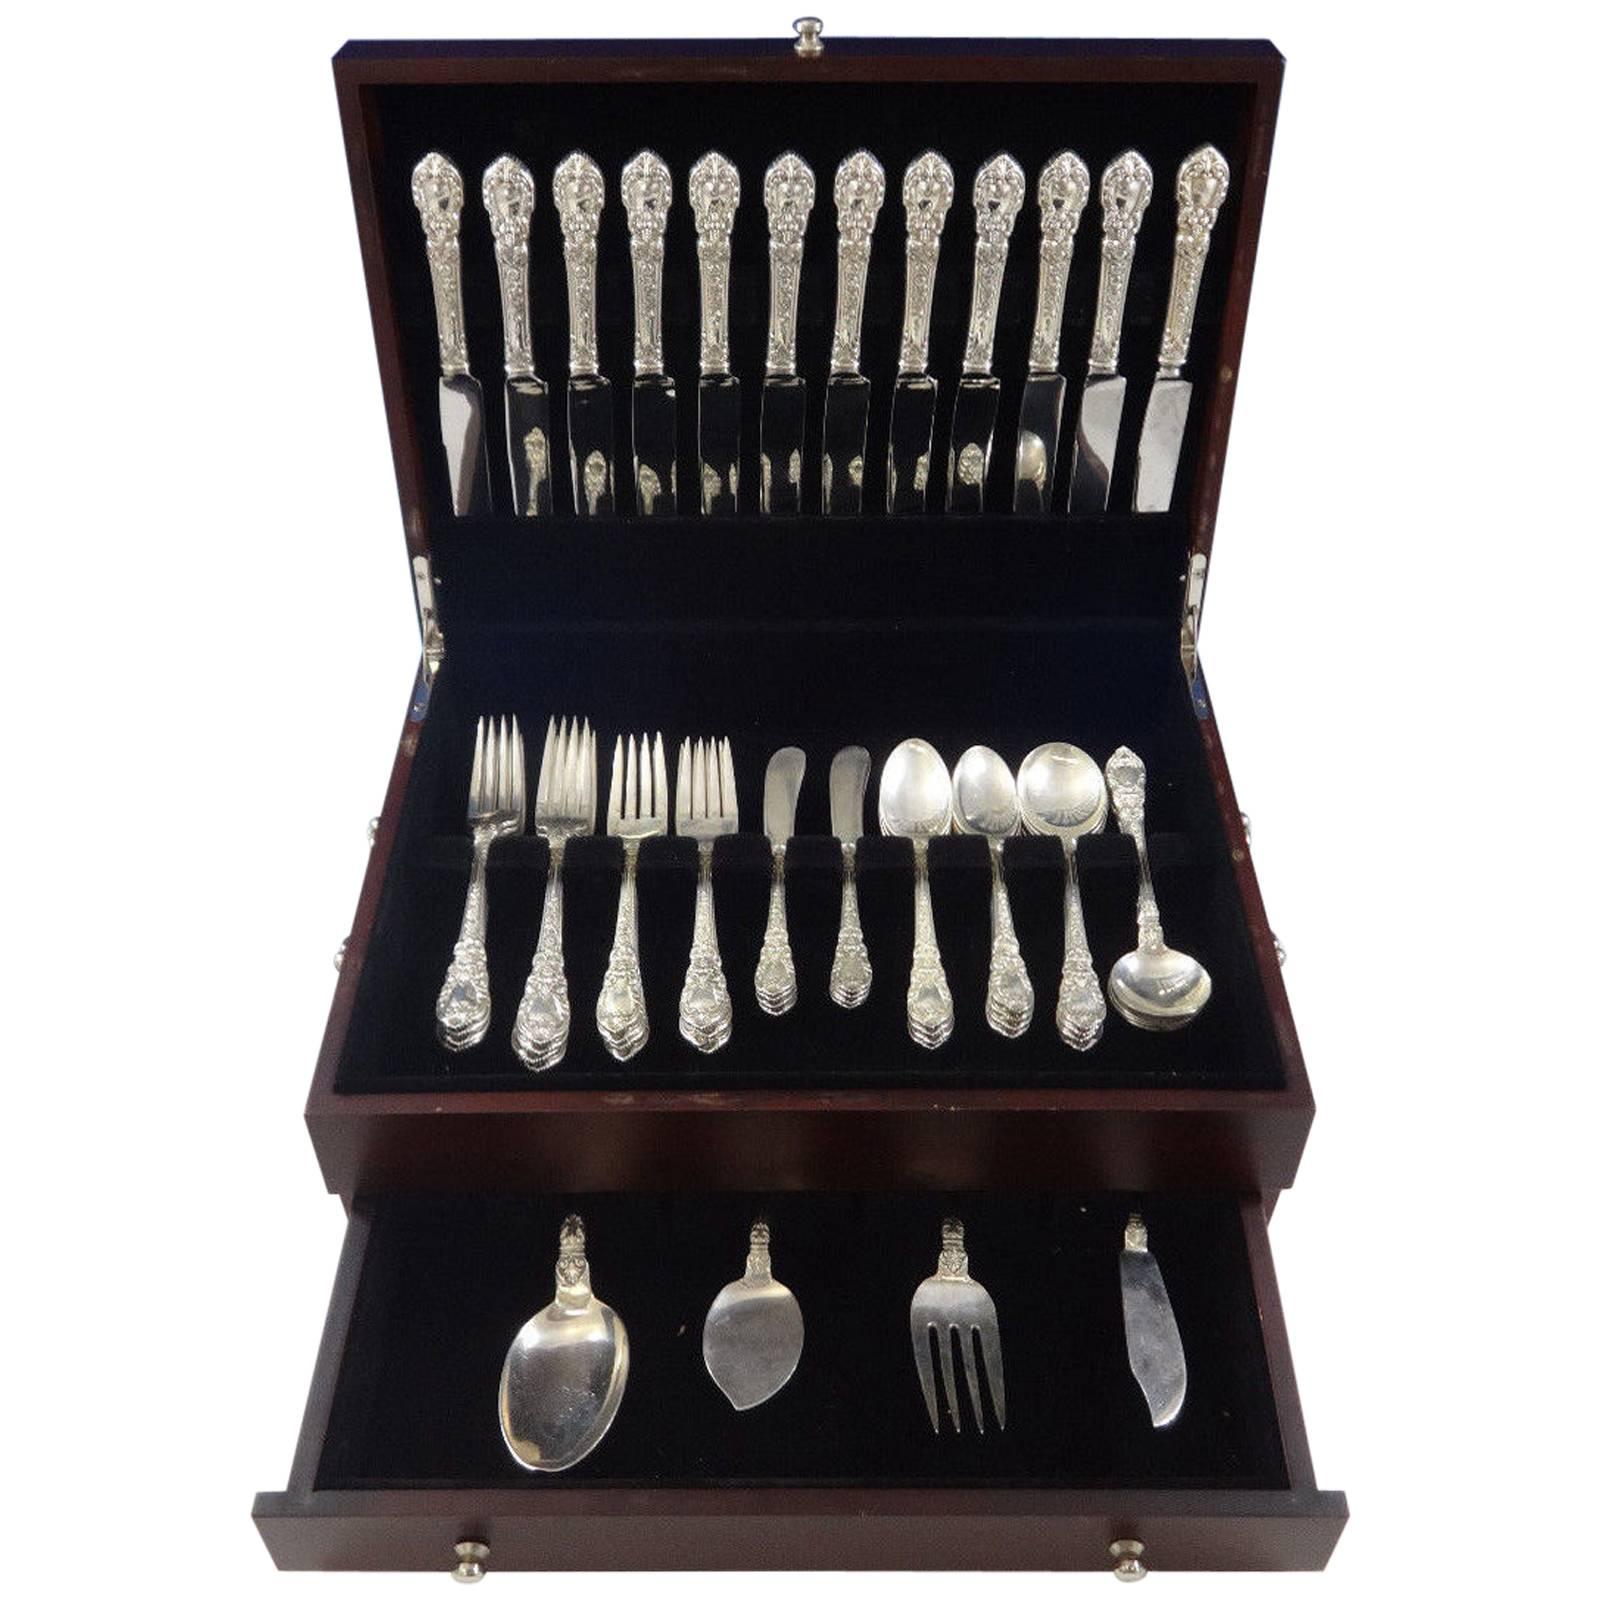 Beautiful and scarce Charles II by Lunt sterling silver flatware set of 82 pieces. This set includes: 12 knives, 9